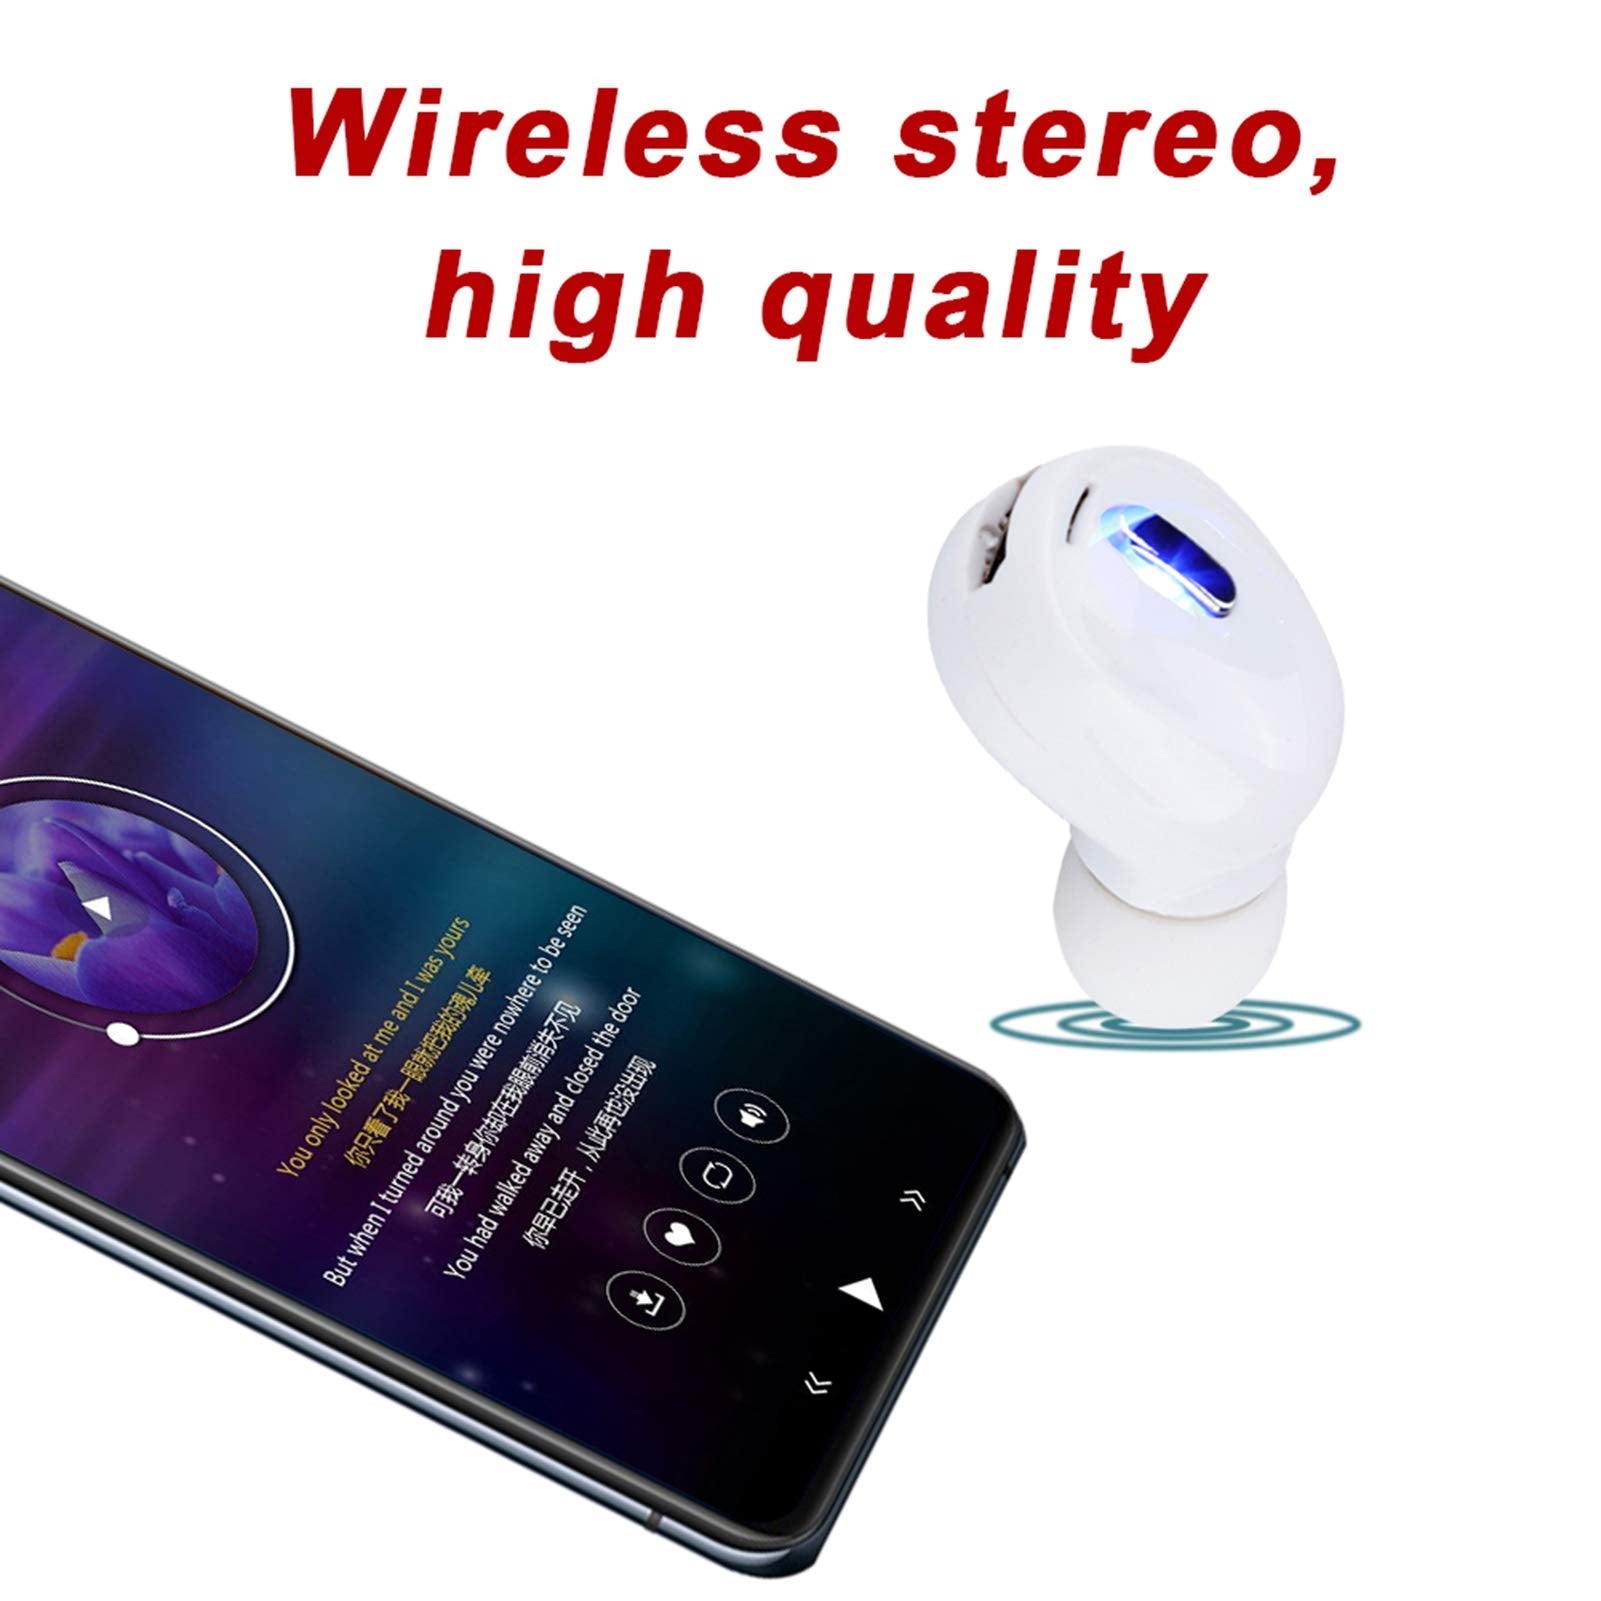 Mini Wireless Bluetooth Headset, Universal Earphones Headphones Earbuds, High Sound Quality in Ear Earbud Multifunctional Simpliy and Comfortable, for Running Earphone Cycling Hiking Yoga (White)